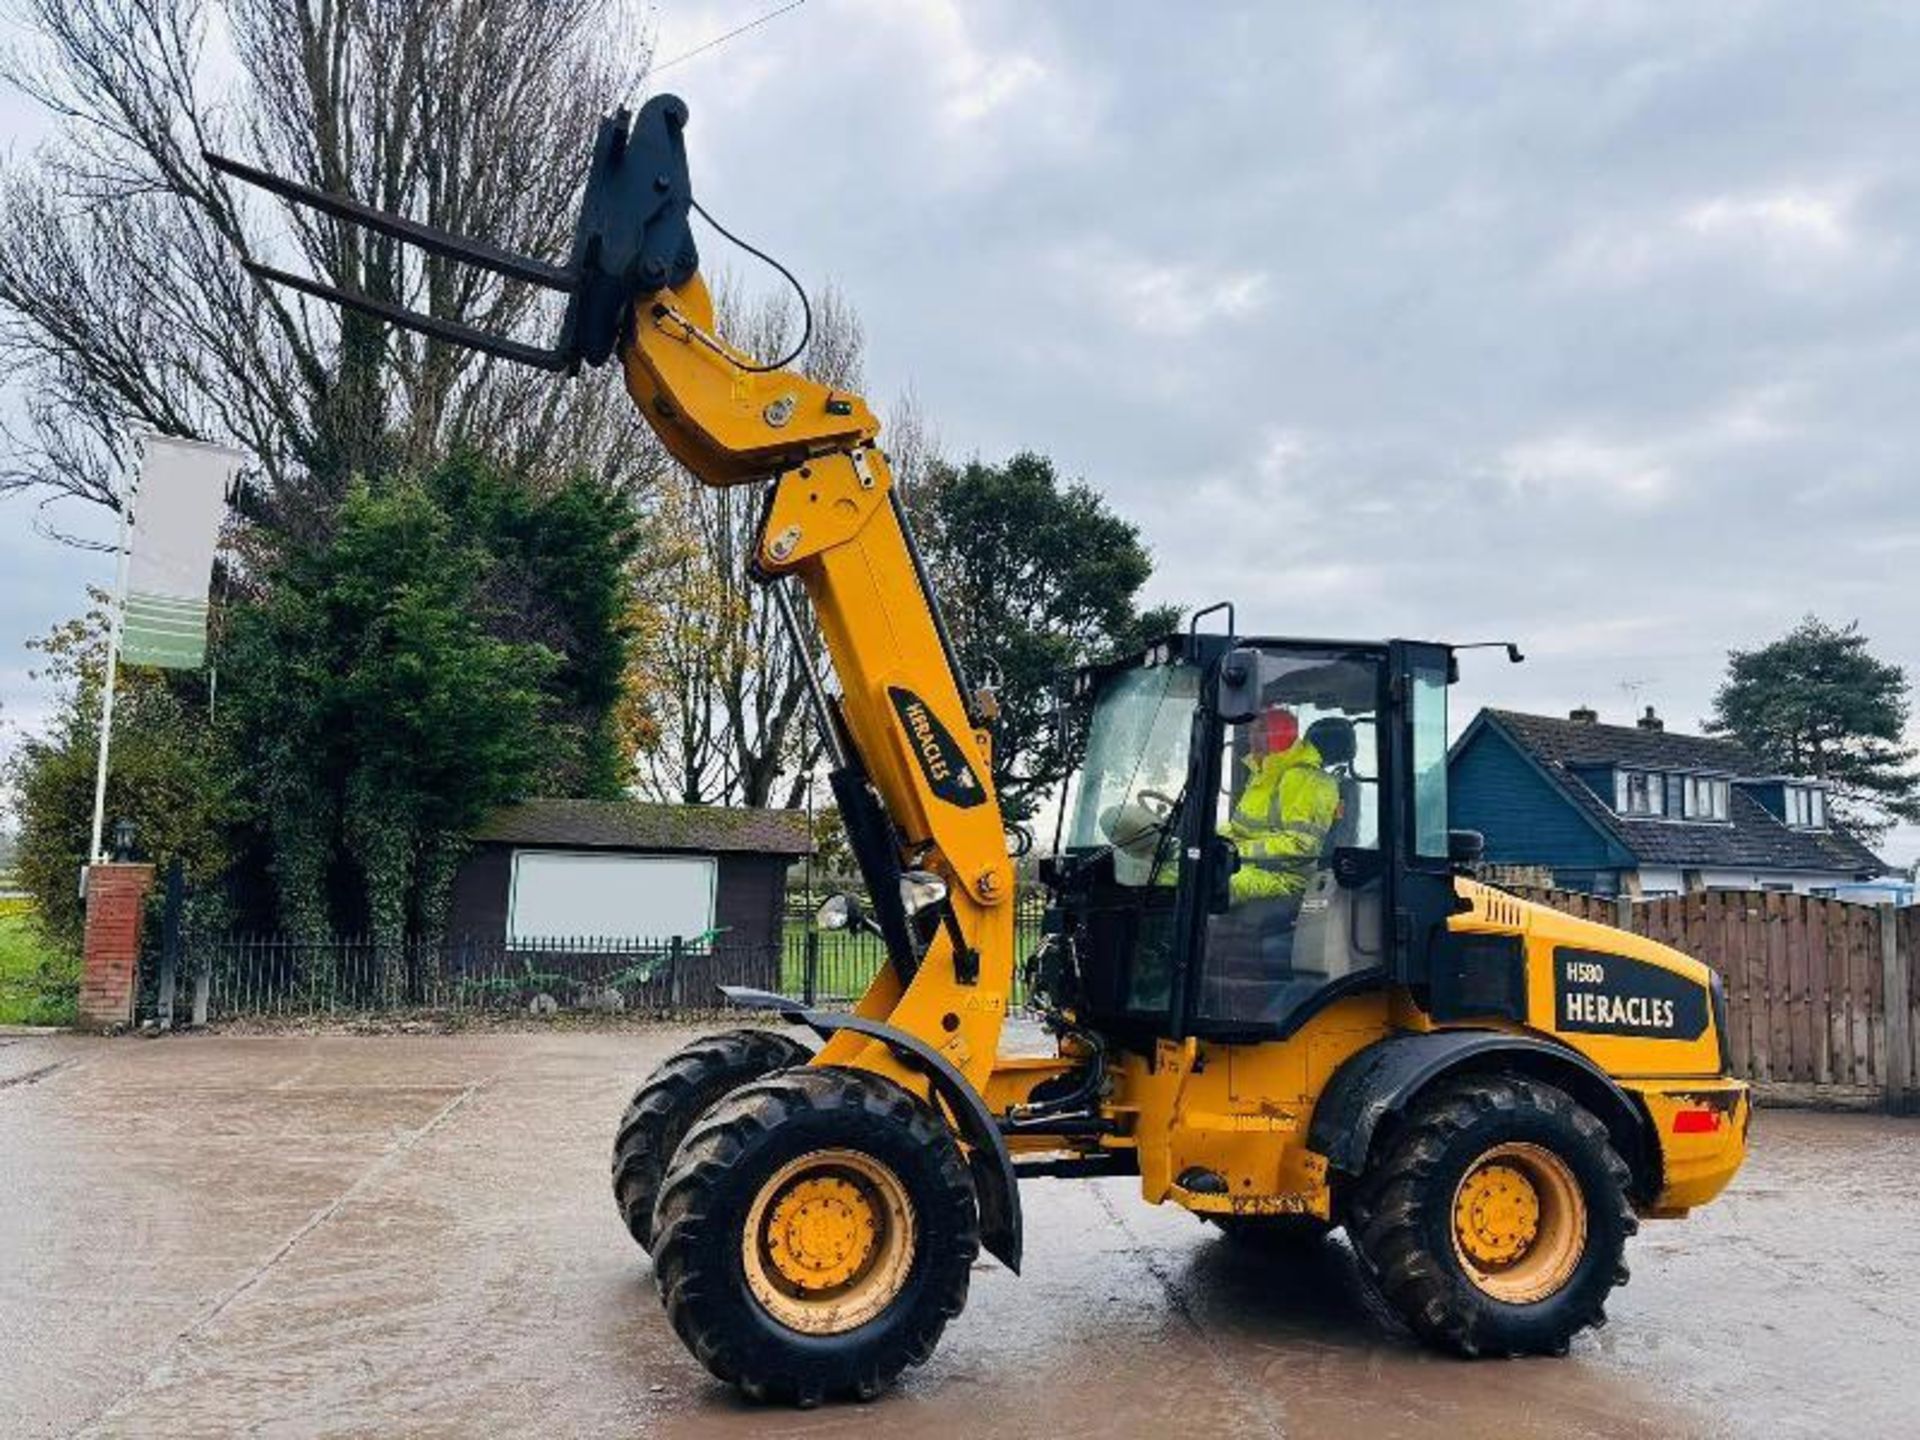 HERACLES H580 4WD TELEHANDLER *YEAR 2019, 1514 HOURS* C/W QUICK HITCH & PALLET TINES - Image 2 of 16